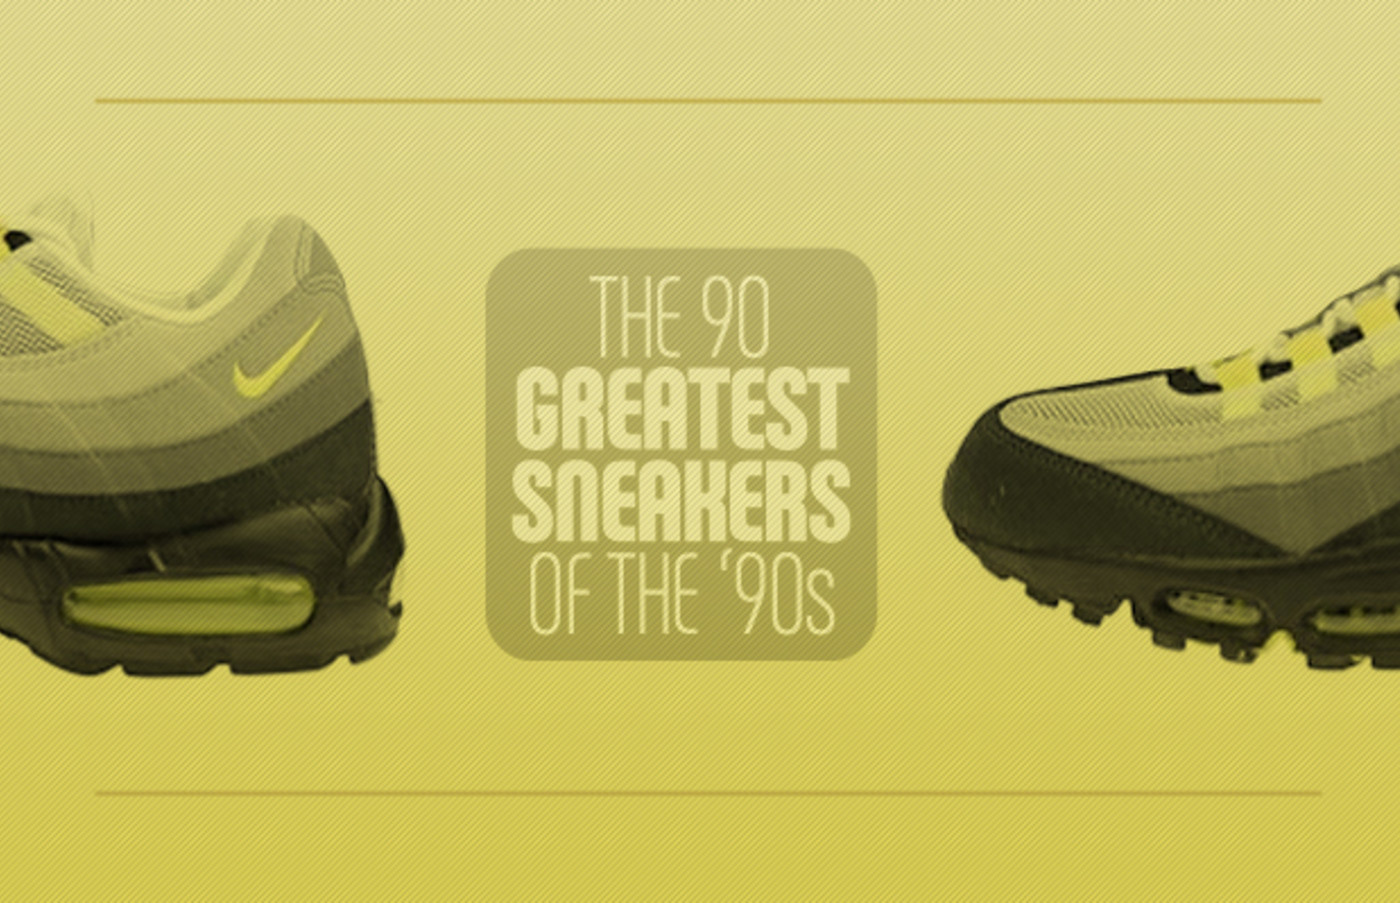 Paradise Interesting Fulfill A Definitive Guide for 90 Greatest Sneakers of the '90s | Complex